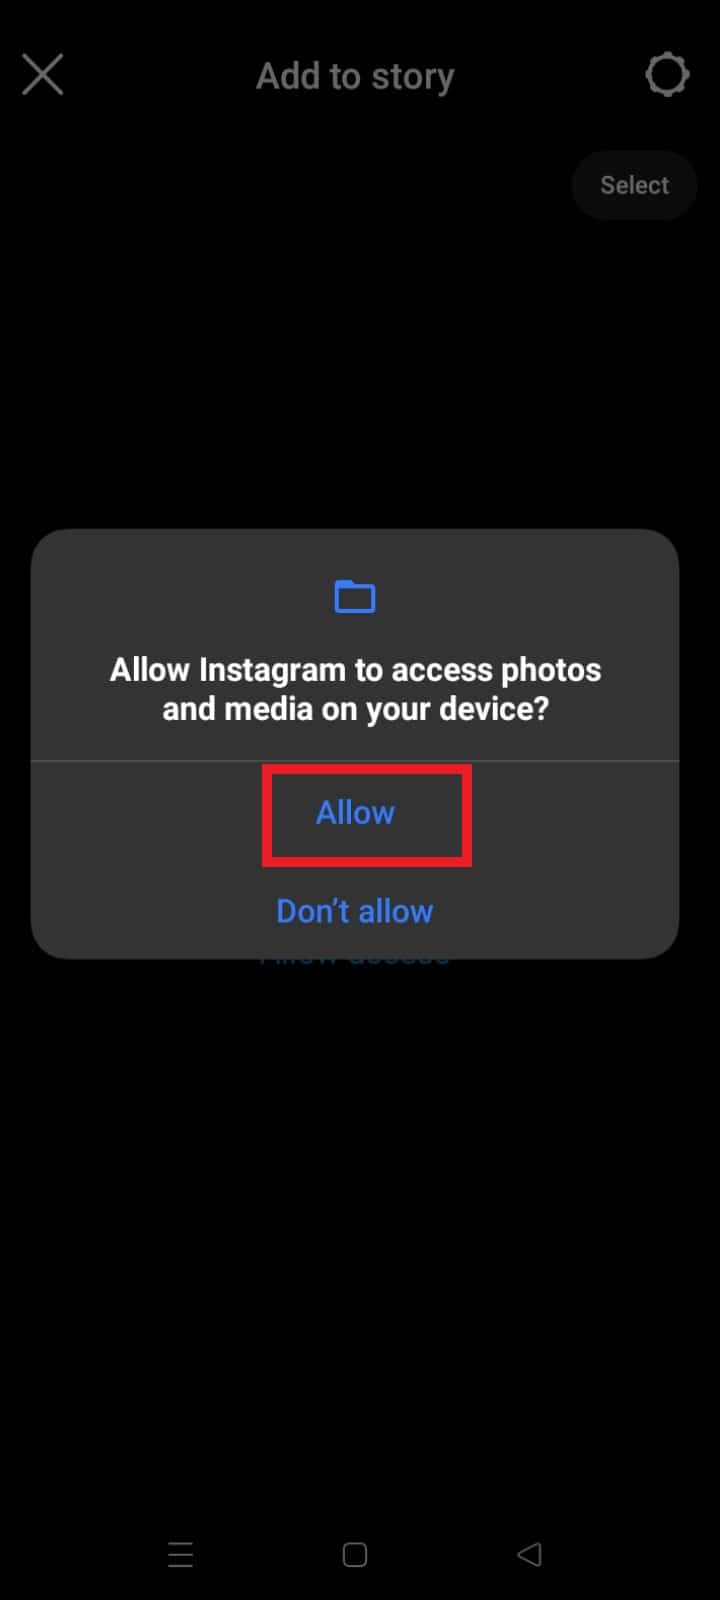  Please select Allow and/or While using the app when specified. | How to See and Delete IG Story Drafts